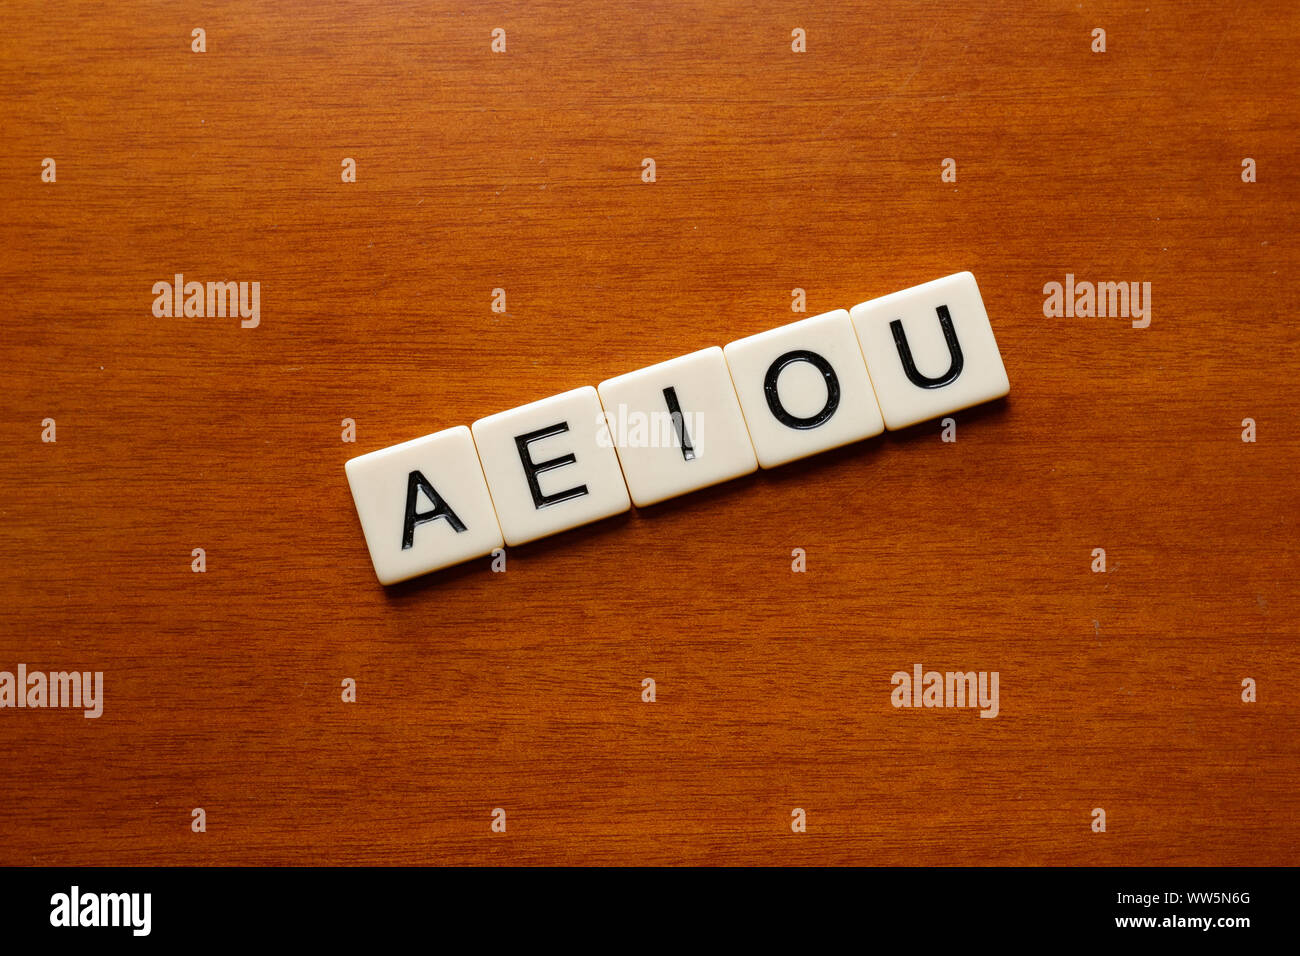 Cambre / Spain - April 18 2019: AEIOU vowel letters on a wood table Stock Photo